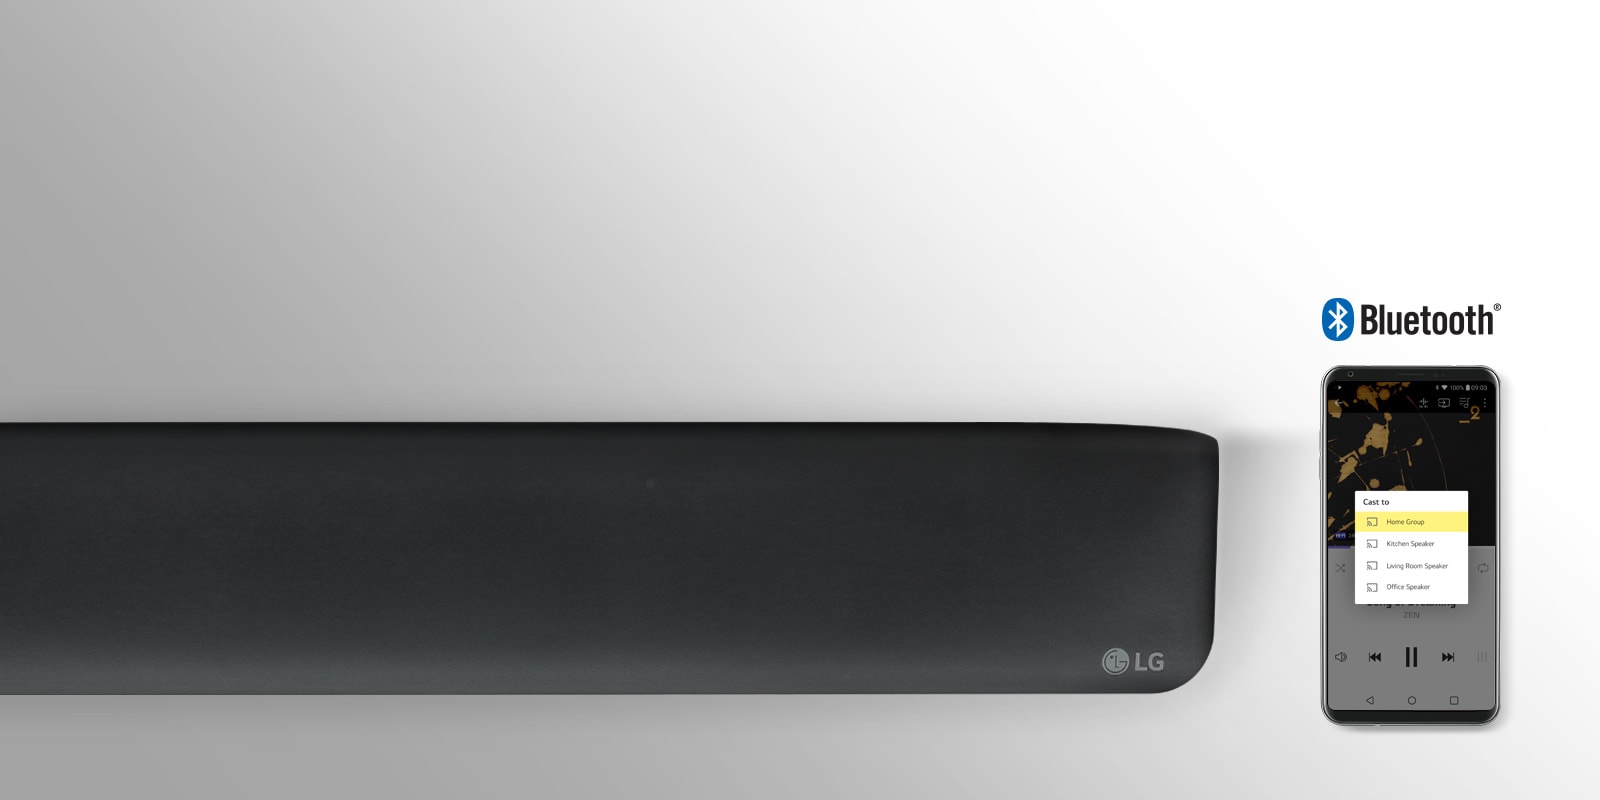 Bluetooth Stand-by, wake up your Sound Bar